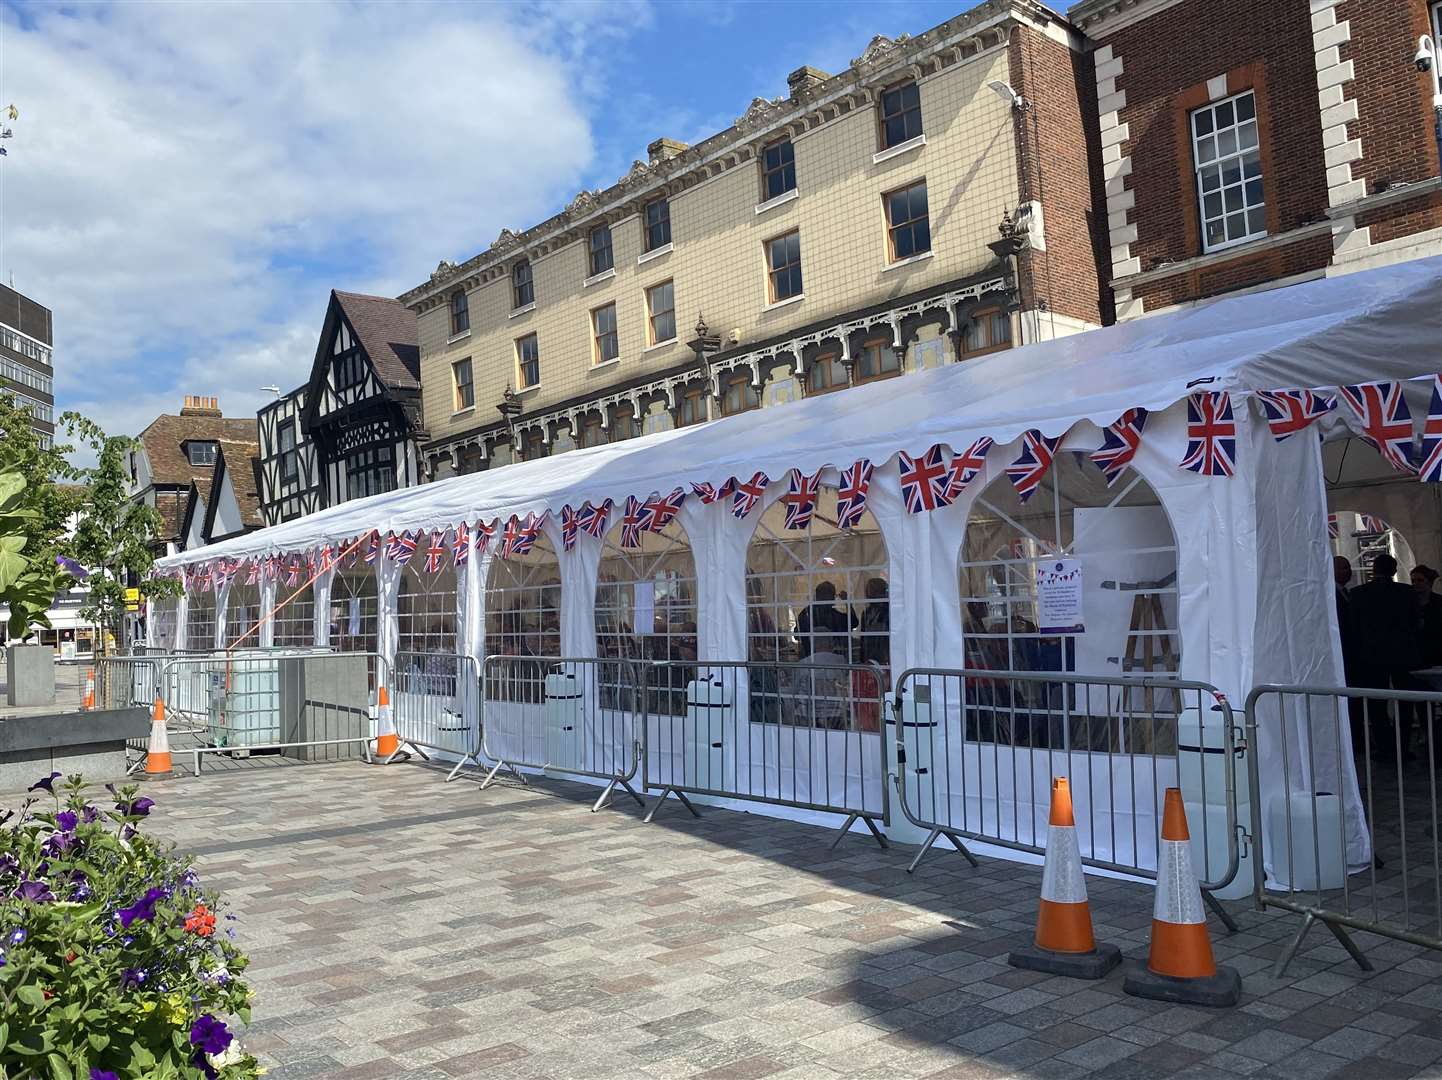 The special occasion was held in a marquee on Jubilee Square, Maidstone